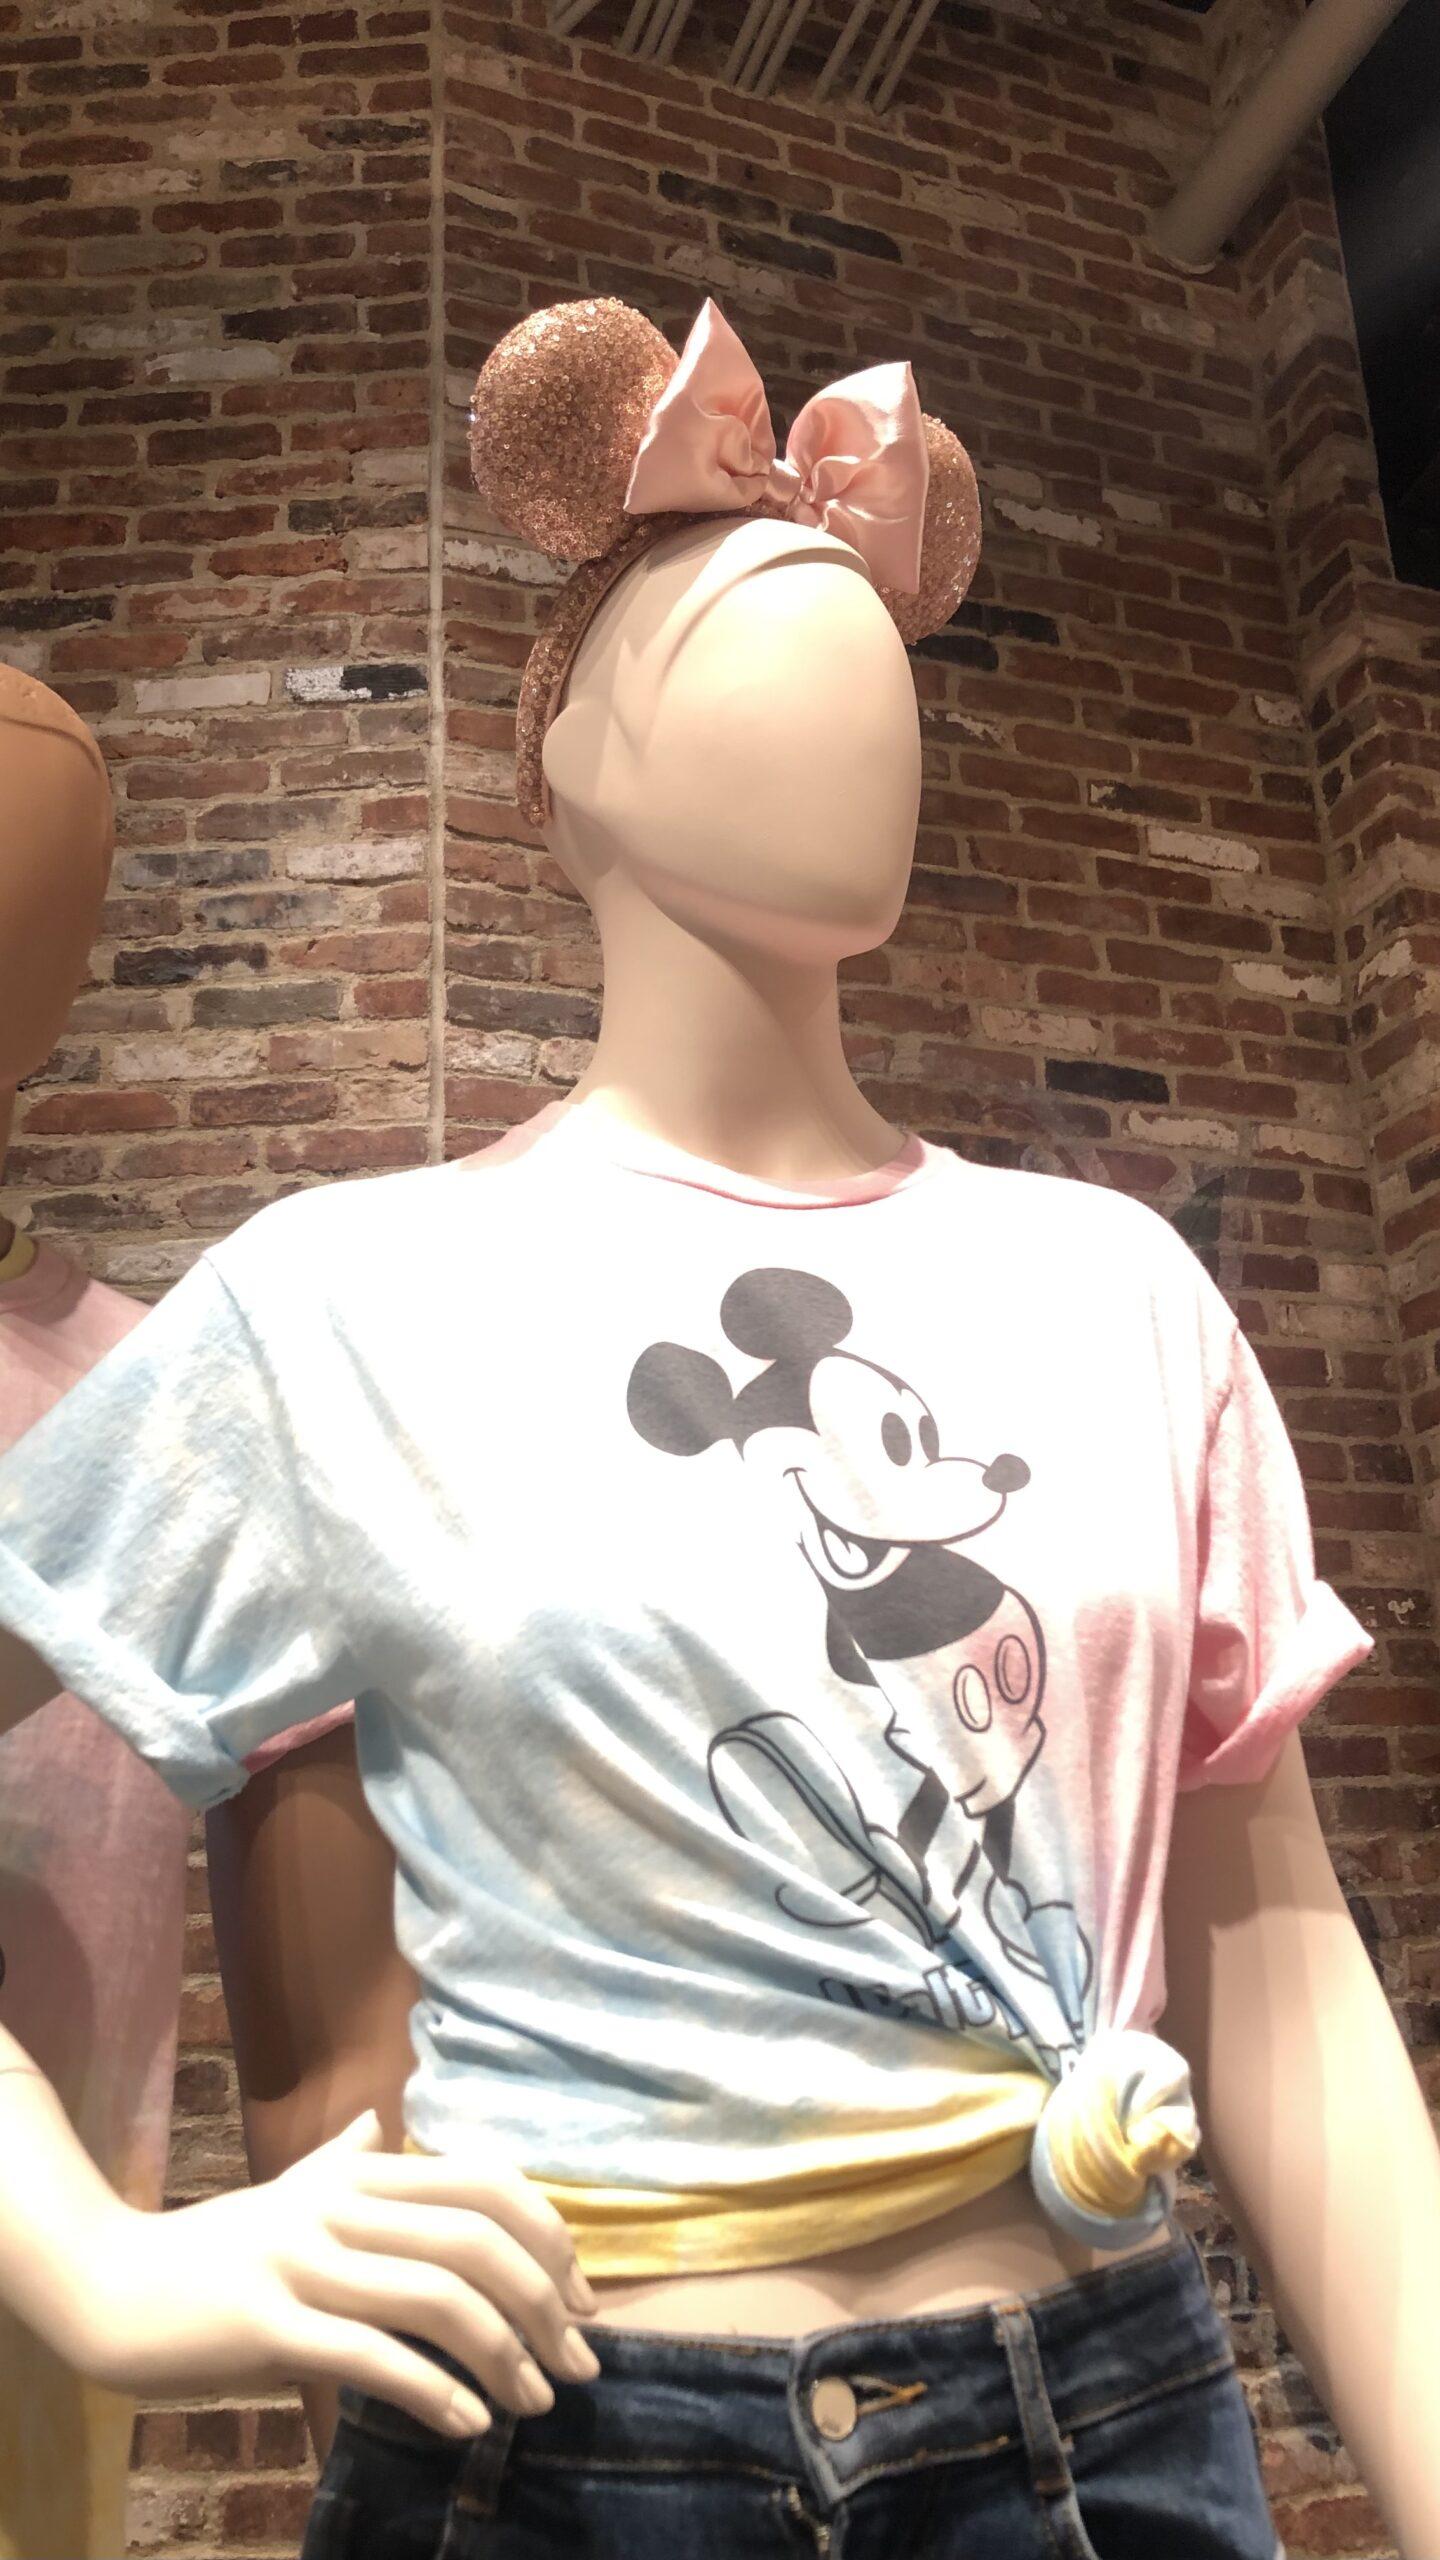 Mannequin modeling Minnie Ears